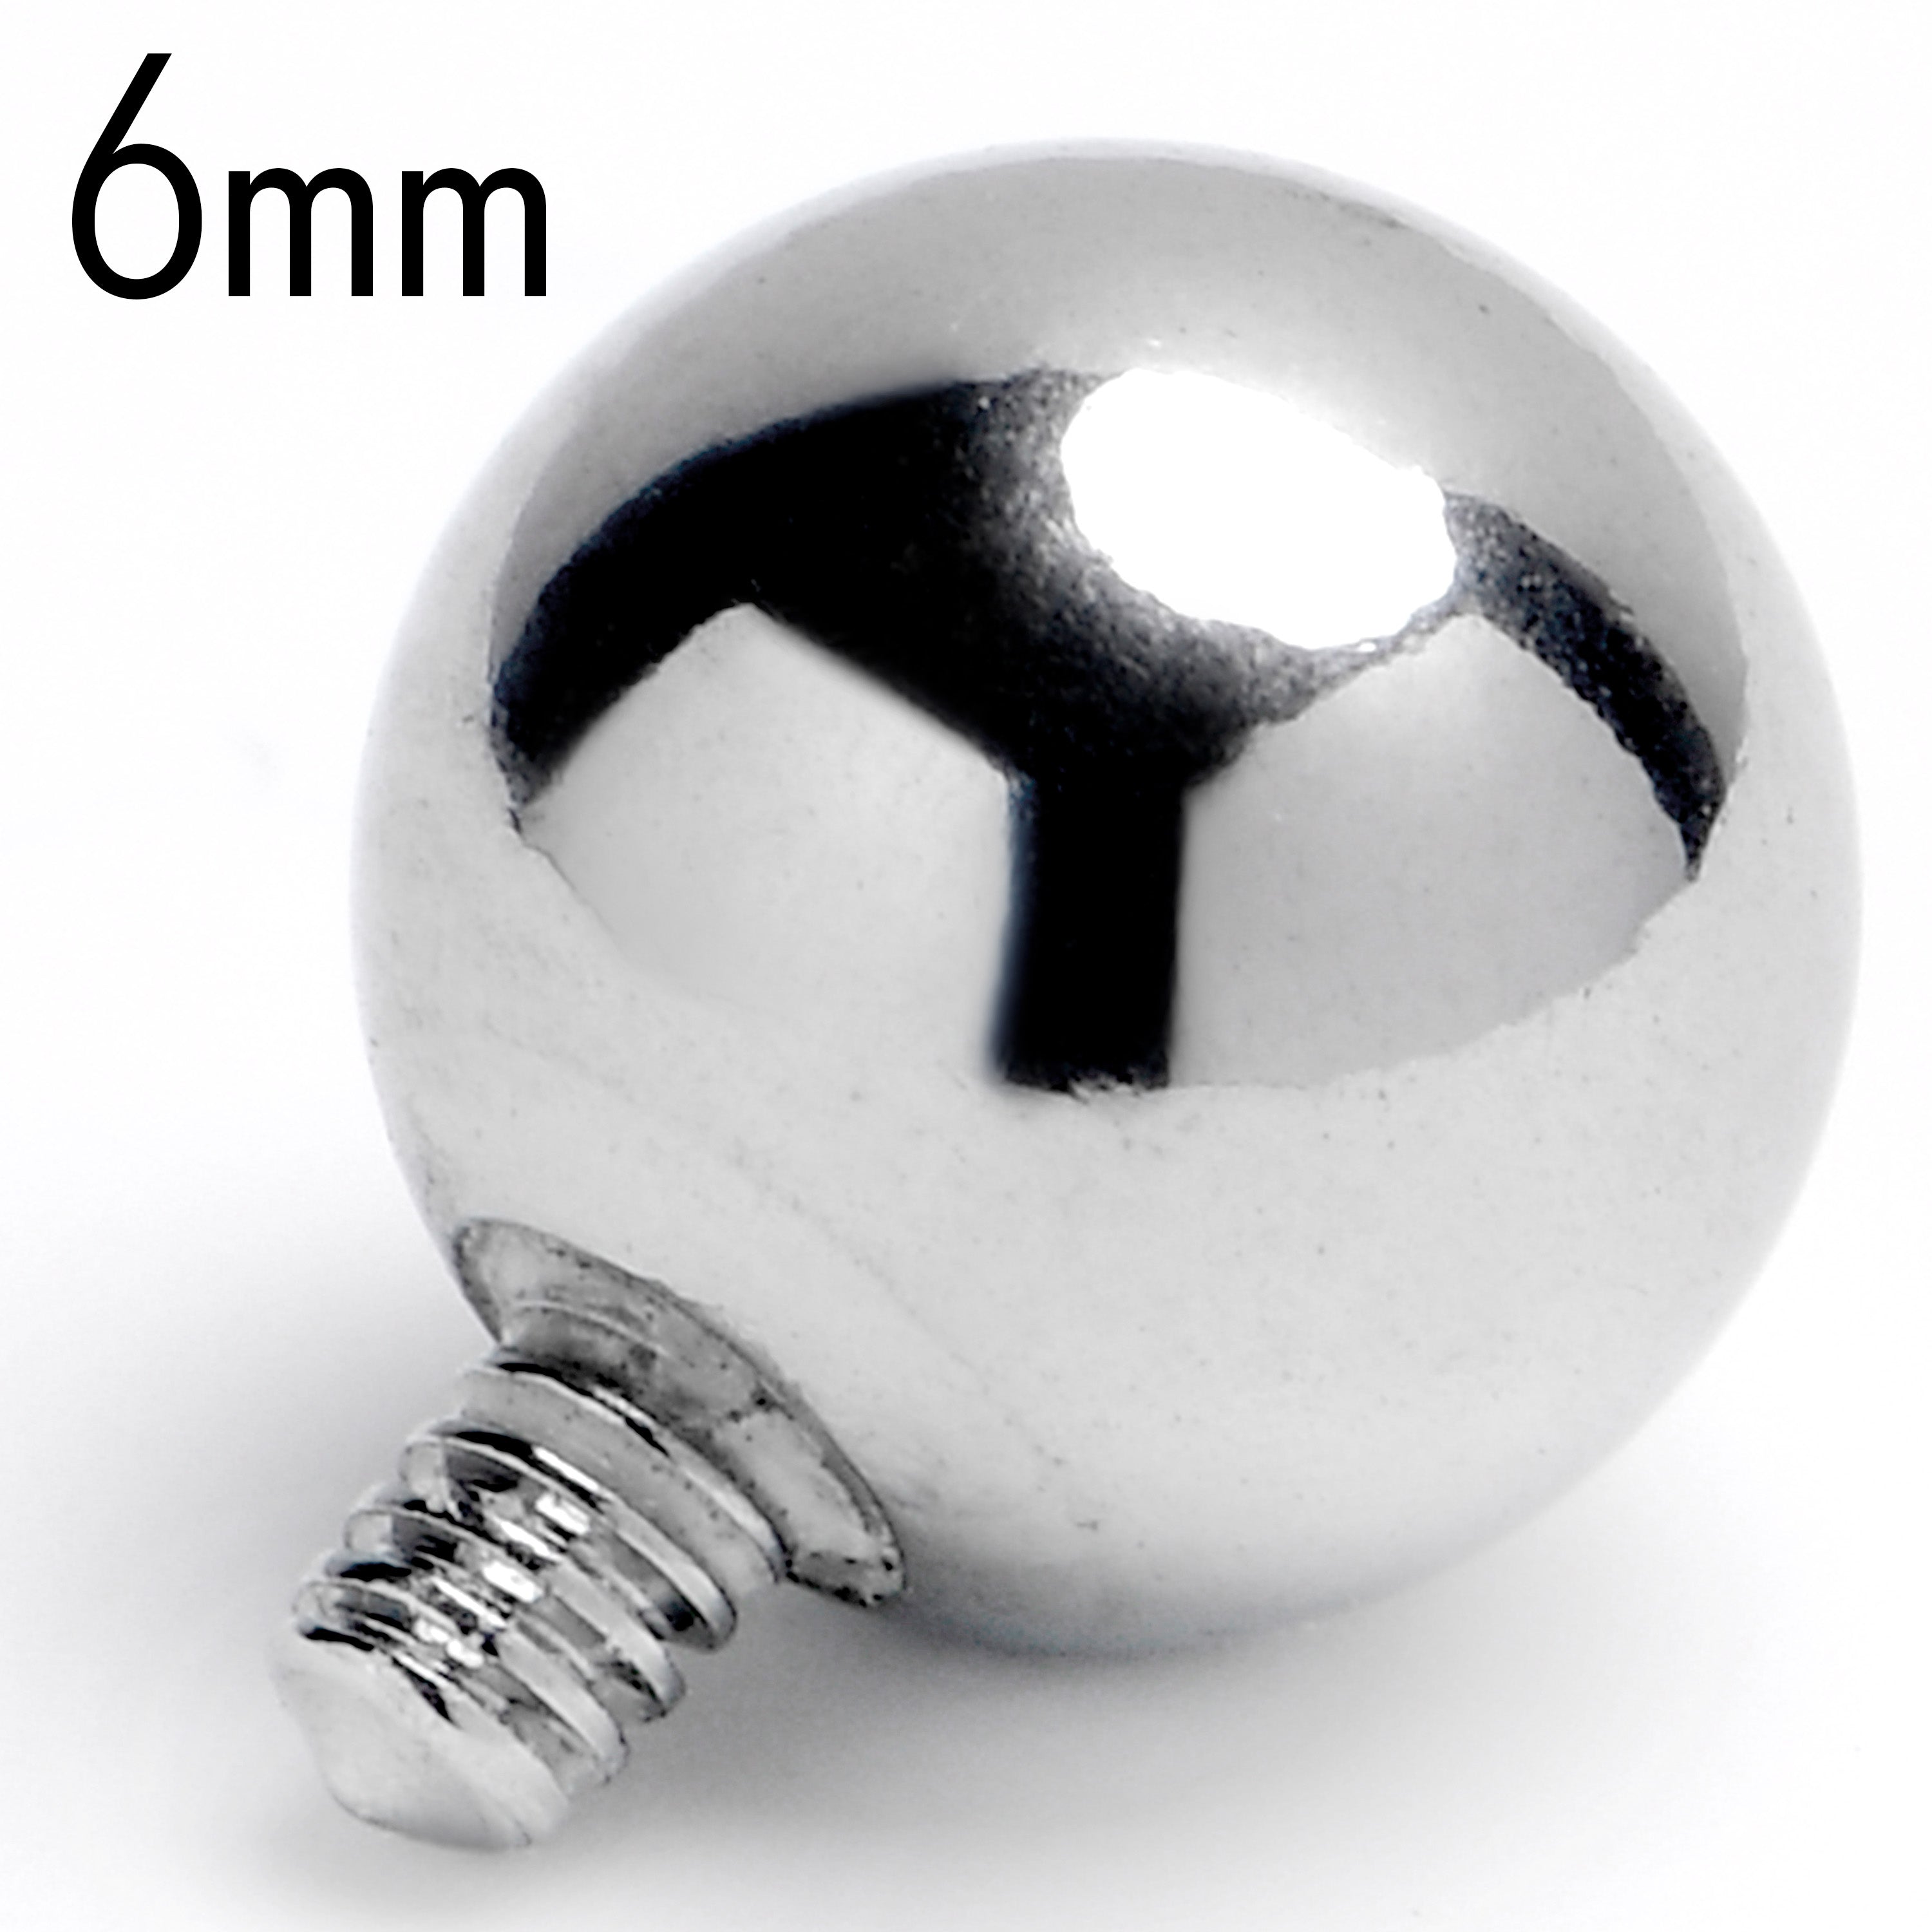 14 Gauge 6mm Replacement Ball End Internally Threaded Jewelry